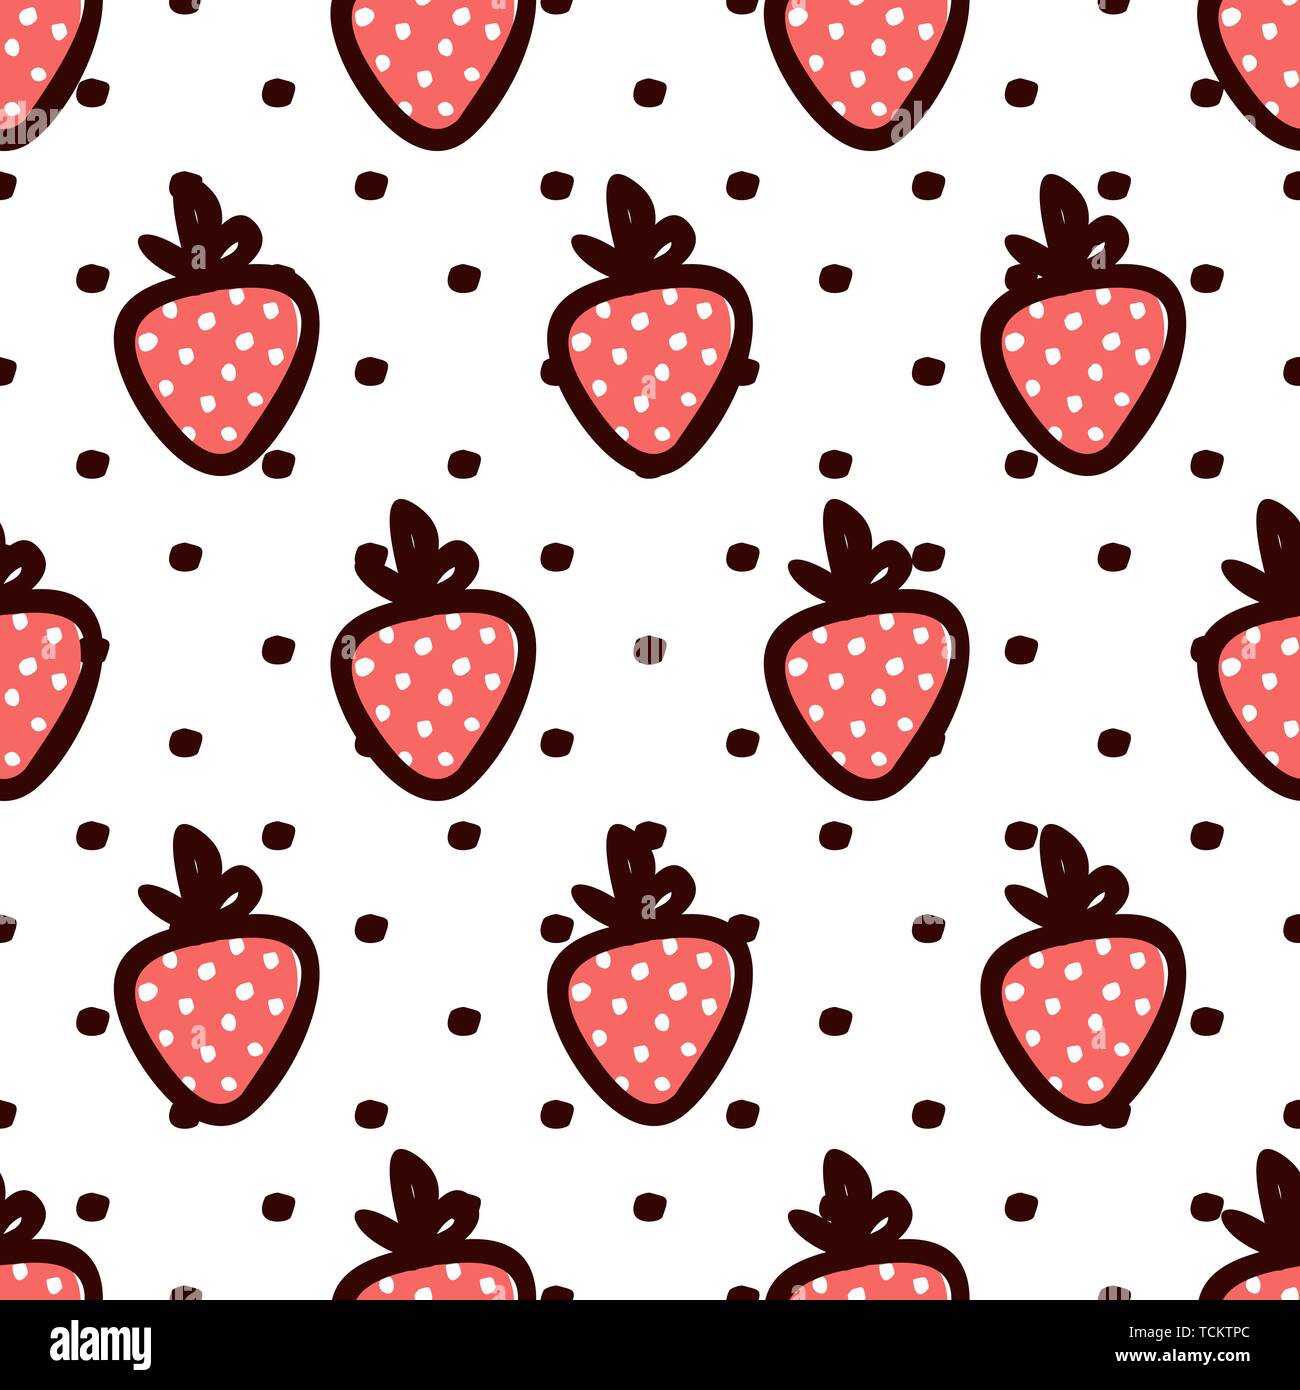 Free download Cute Strawberries Wallpaper I love strawberries 876x619 for  your Desktop Mobile  Tablet  Explore 42 Kawaii Strawberry Wallpaper   Strawberry Shortcake Wallpaper Strawberry Wallpaper Strawberry Shortcake  Backgrounds